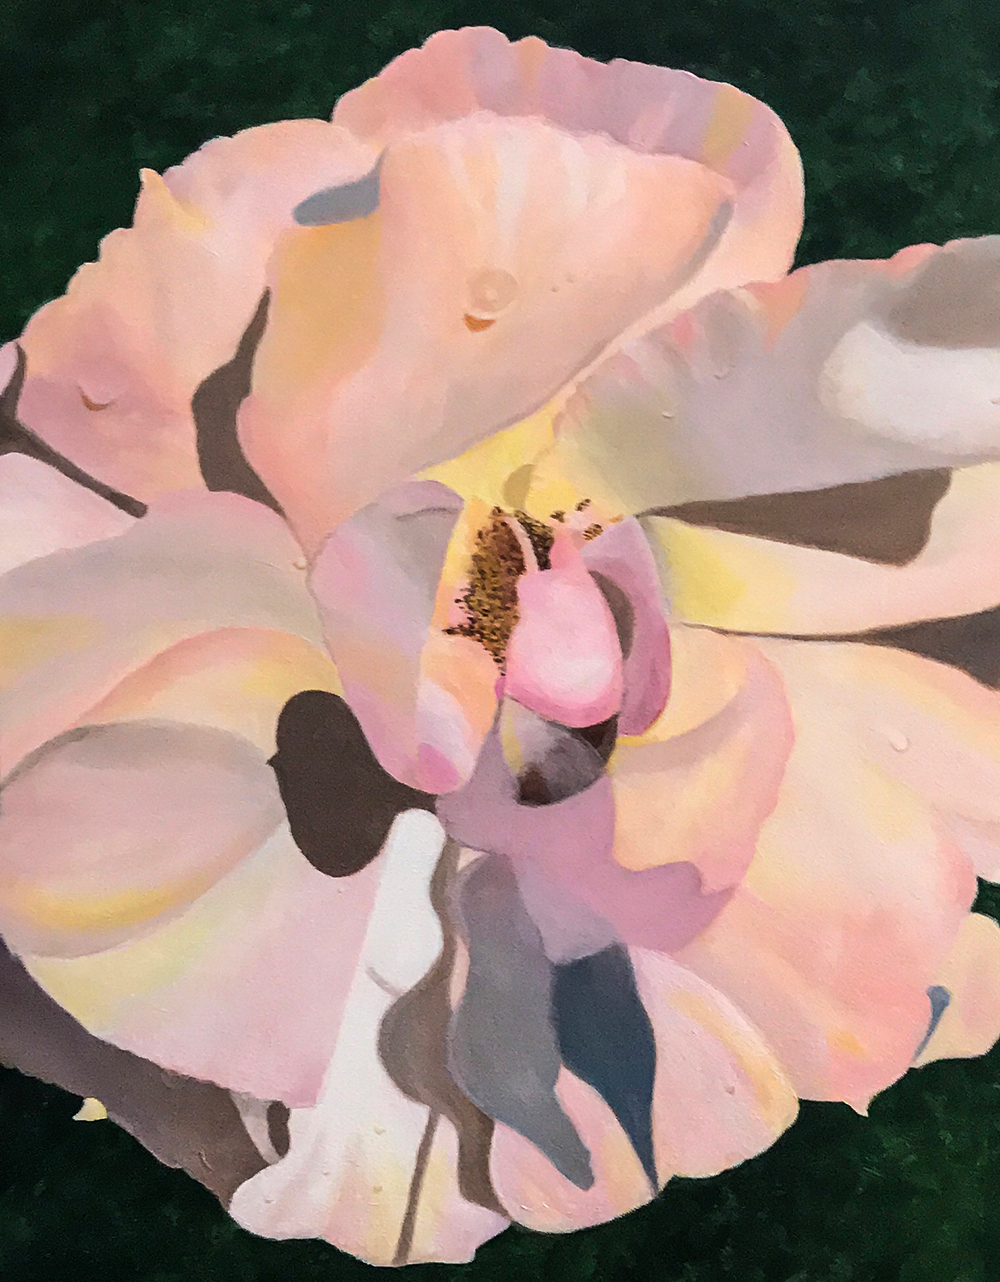 Marcia Haller was awarded First Place for Acrylic Painting by a Professional artist. Her painting, titled “A Villa Borghese Muse,” is a close-up view of a single pale-pink flower, fully open with its wide, curvaceous petals nearly filling the canvas. A very dark green background sets off the luminous colors of the flower, which is painted with subtly gradated colors of pale pinks blending into yellow-pink hues. The flower is very brightly lit, with its own petals, pistil and stamen casting crisp shadows onto the petals. We also see a few droplets of water on the petals.